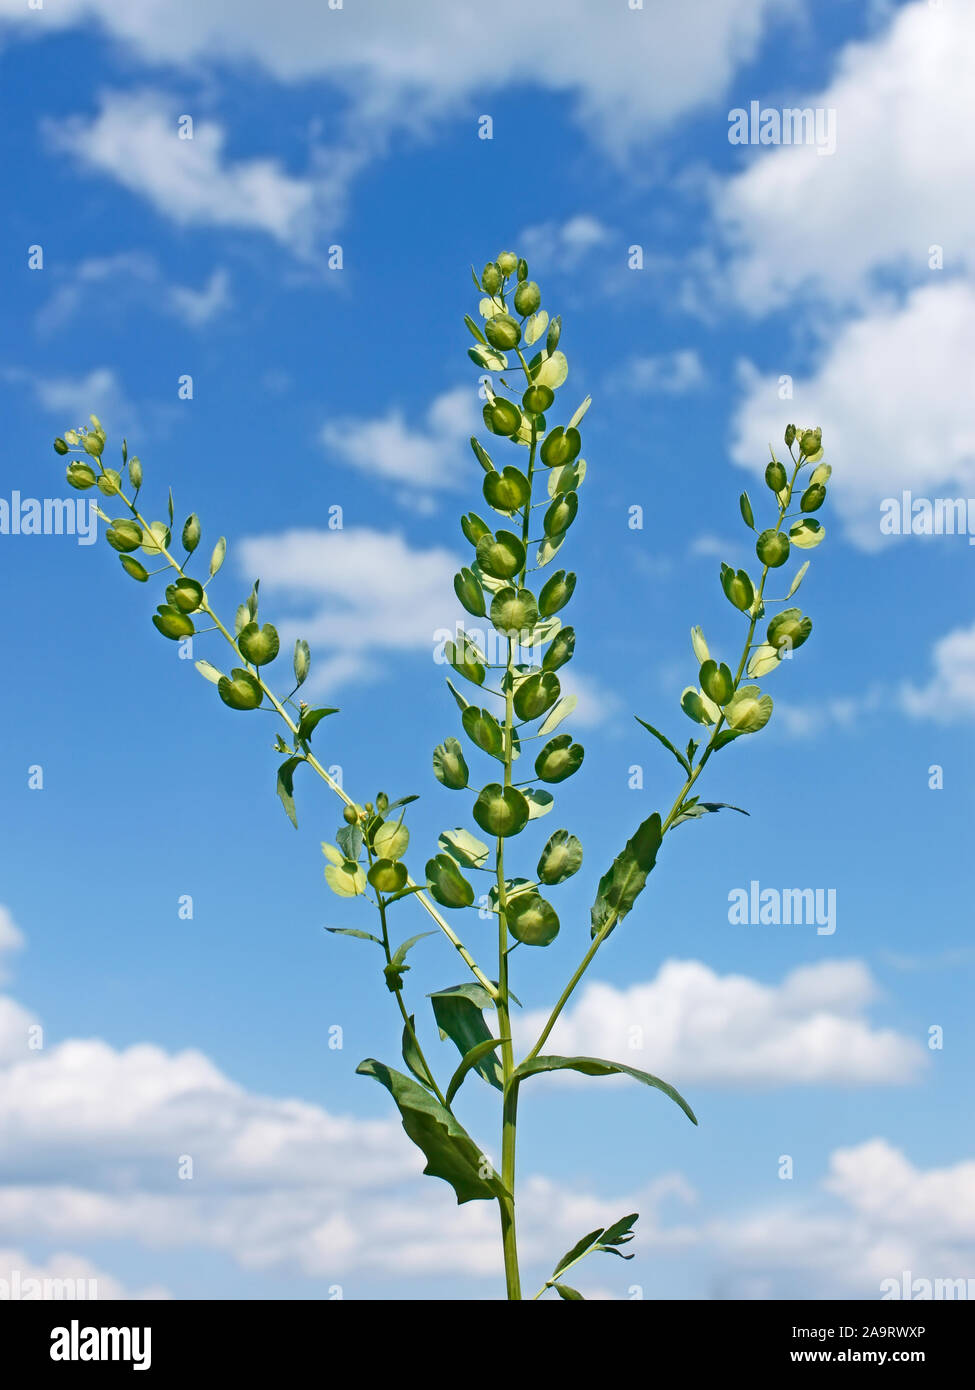 Field Pennycress plant on the background of cloudy sky. Scientific Name: Thlaspi arvense. Mustard family Brassicaceae Stock Photo